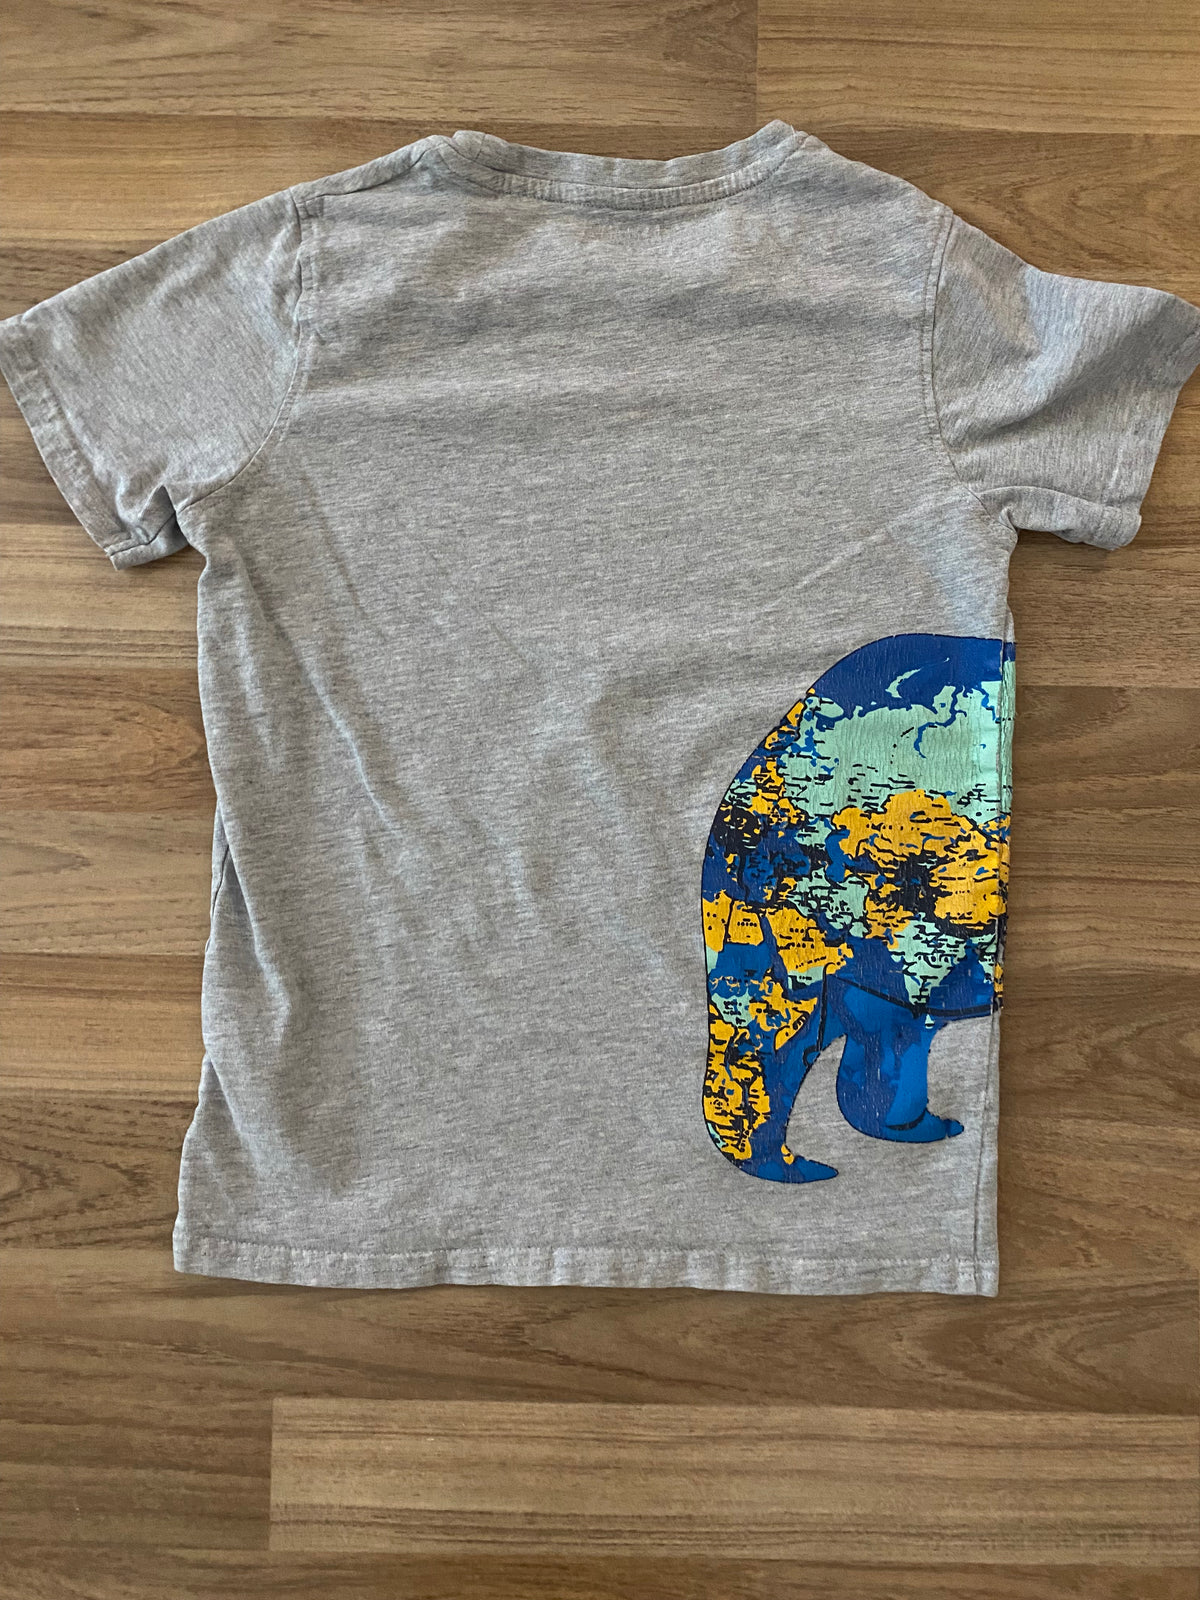 Short Sleeve Graphic Top (Boys Size 9-10)